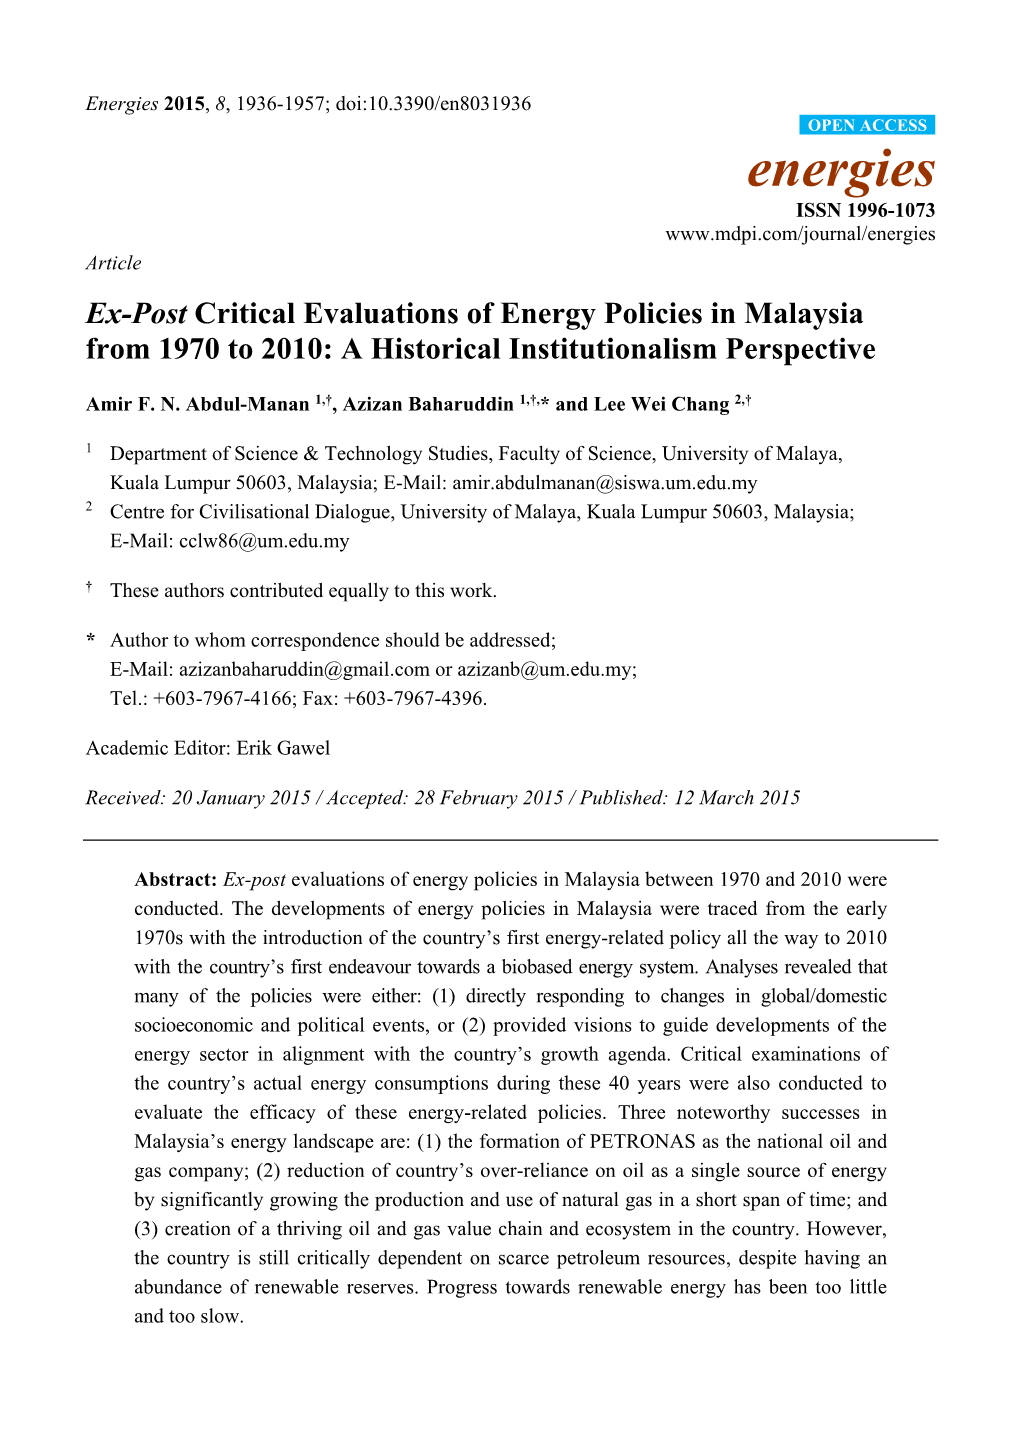 Ex-Post Critical Evaluations of Energy Policies in Malaysia from 1970 to 2010: a Historical Institutionalism Perspective